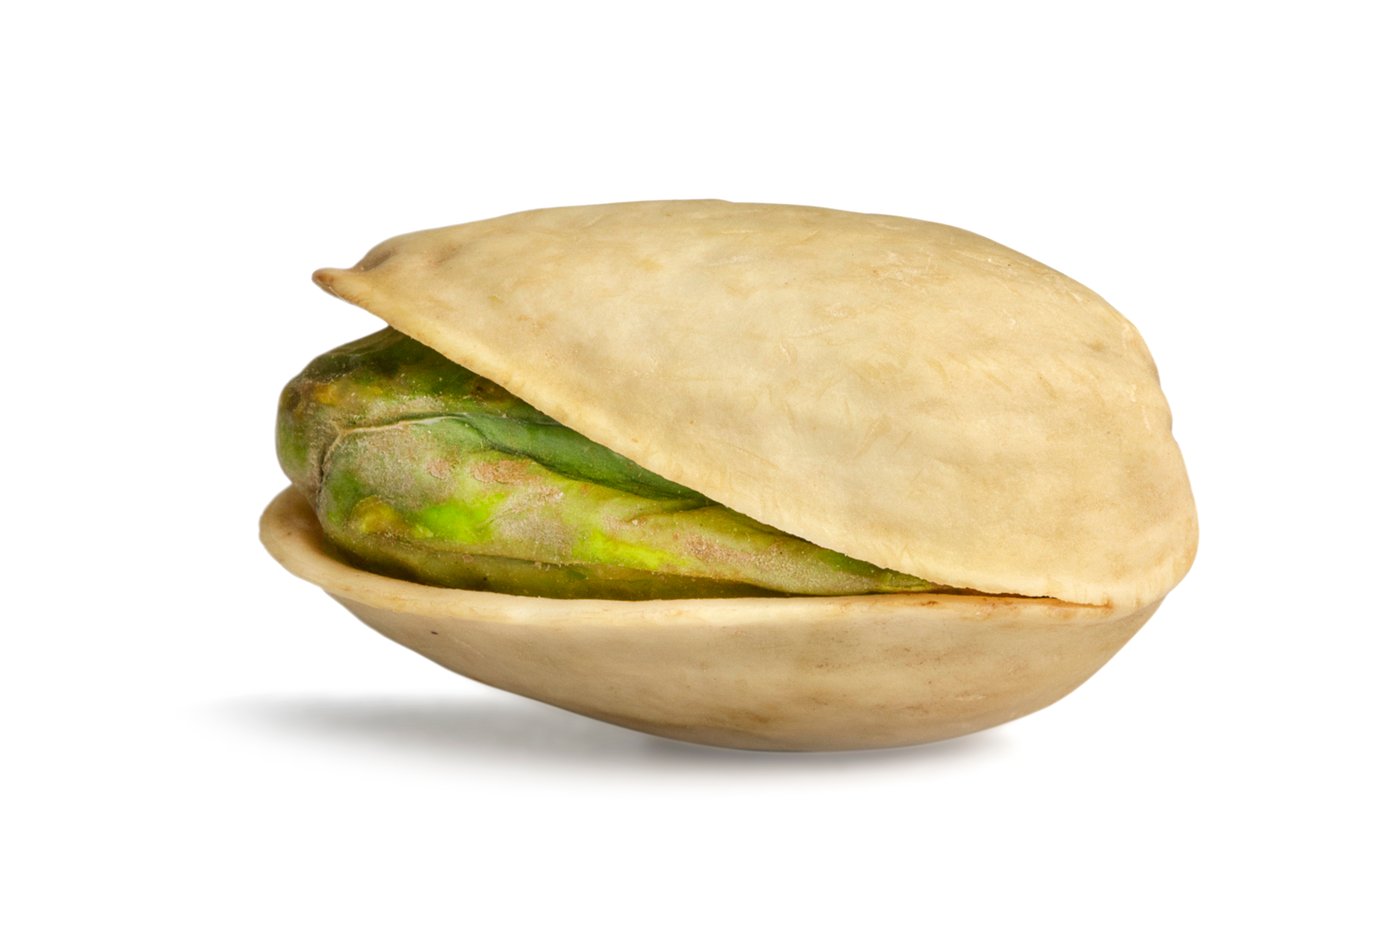 Roasted Pistachios (Unsalted, In Shell) photo